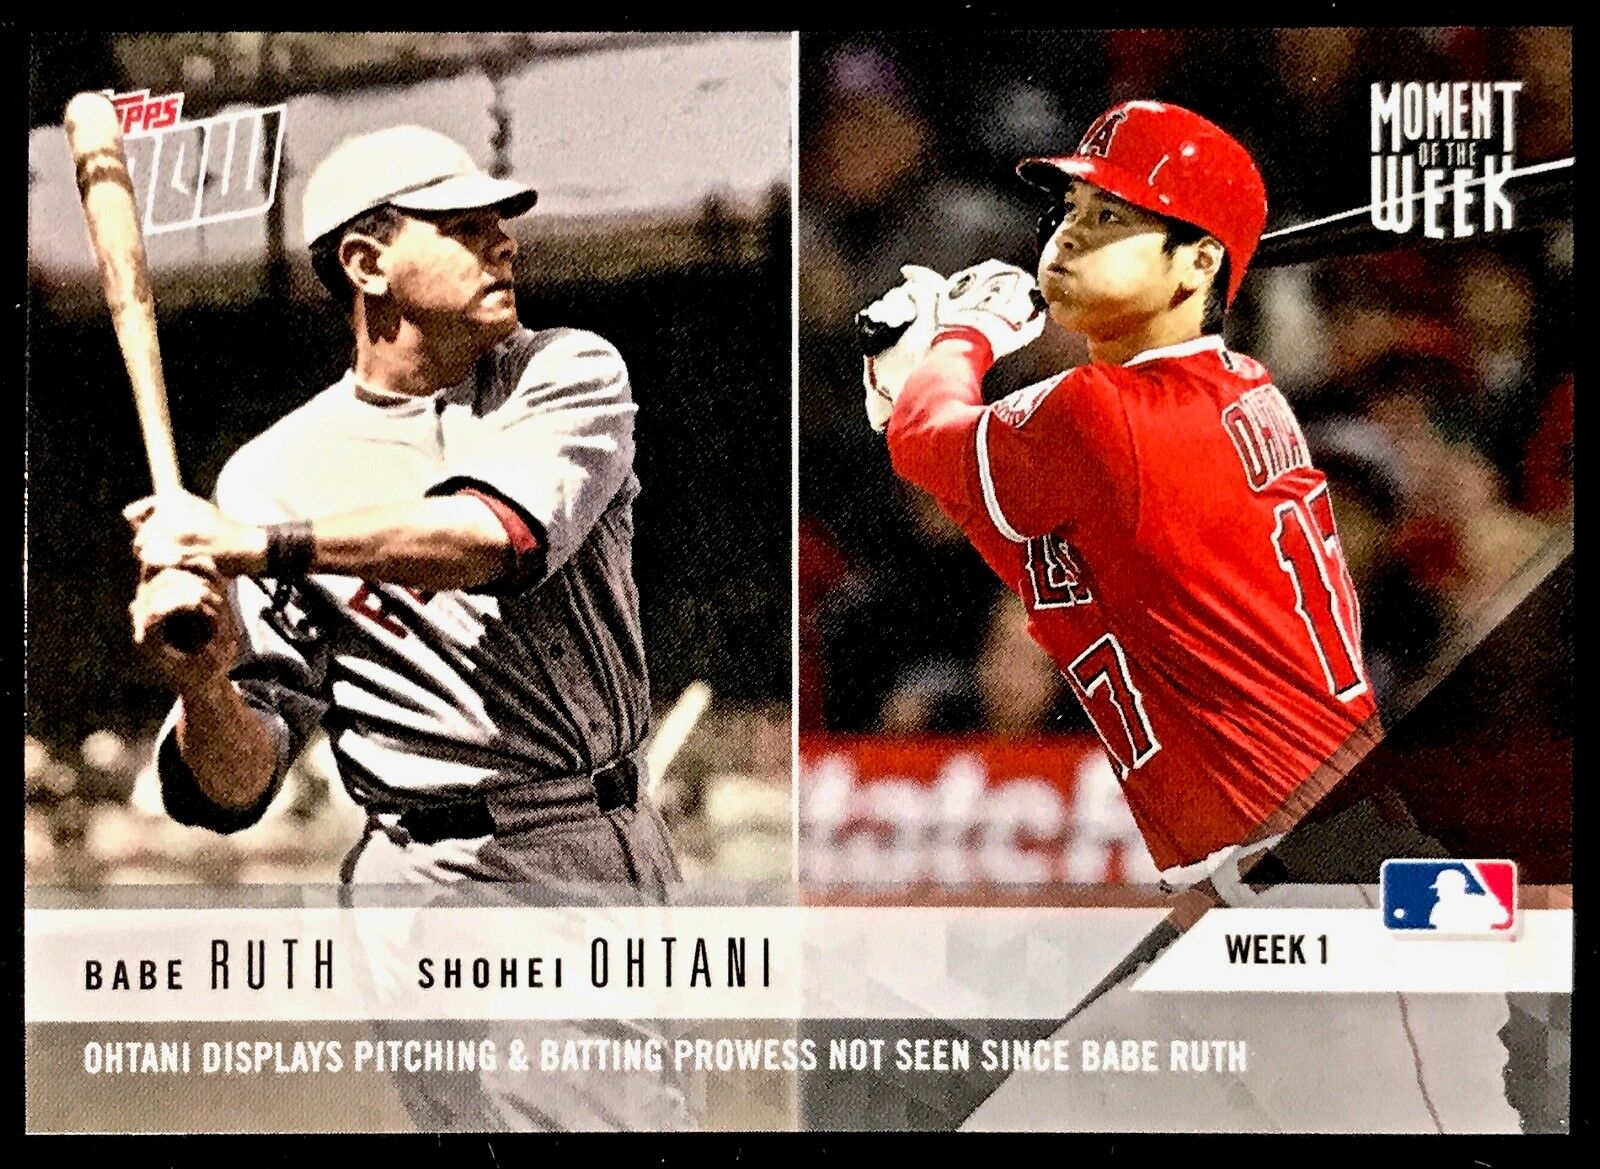 Shohei Ohtani 2022 Topps SSP Variation #1 Price Guide - Sports